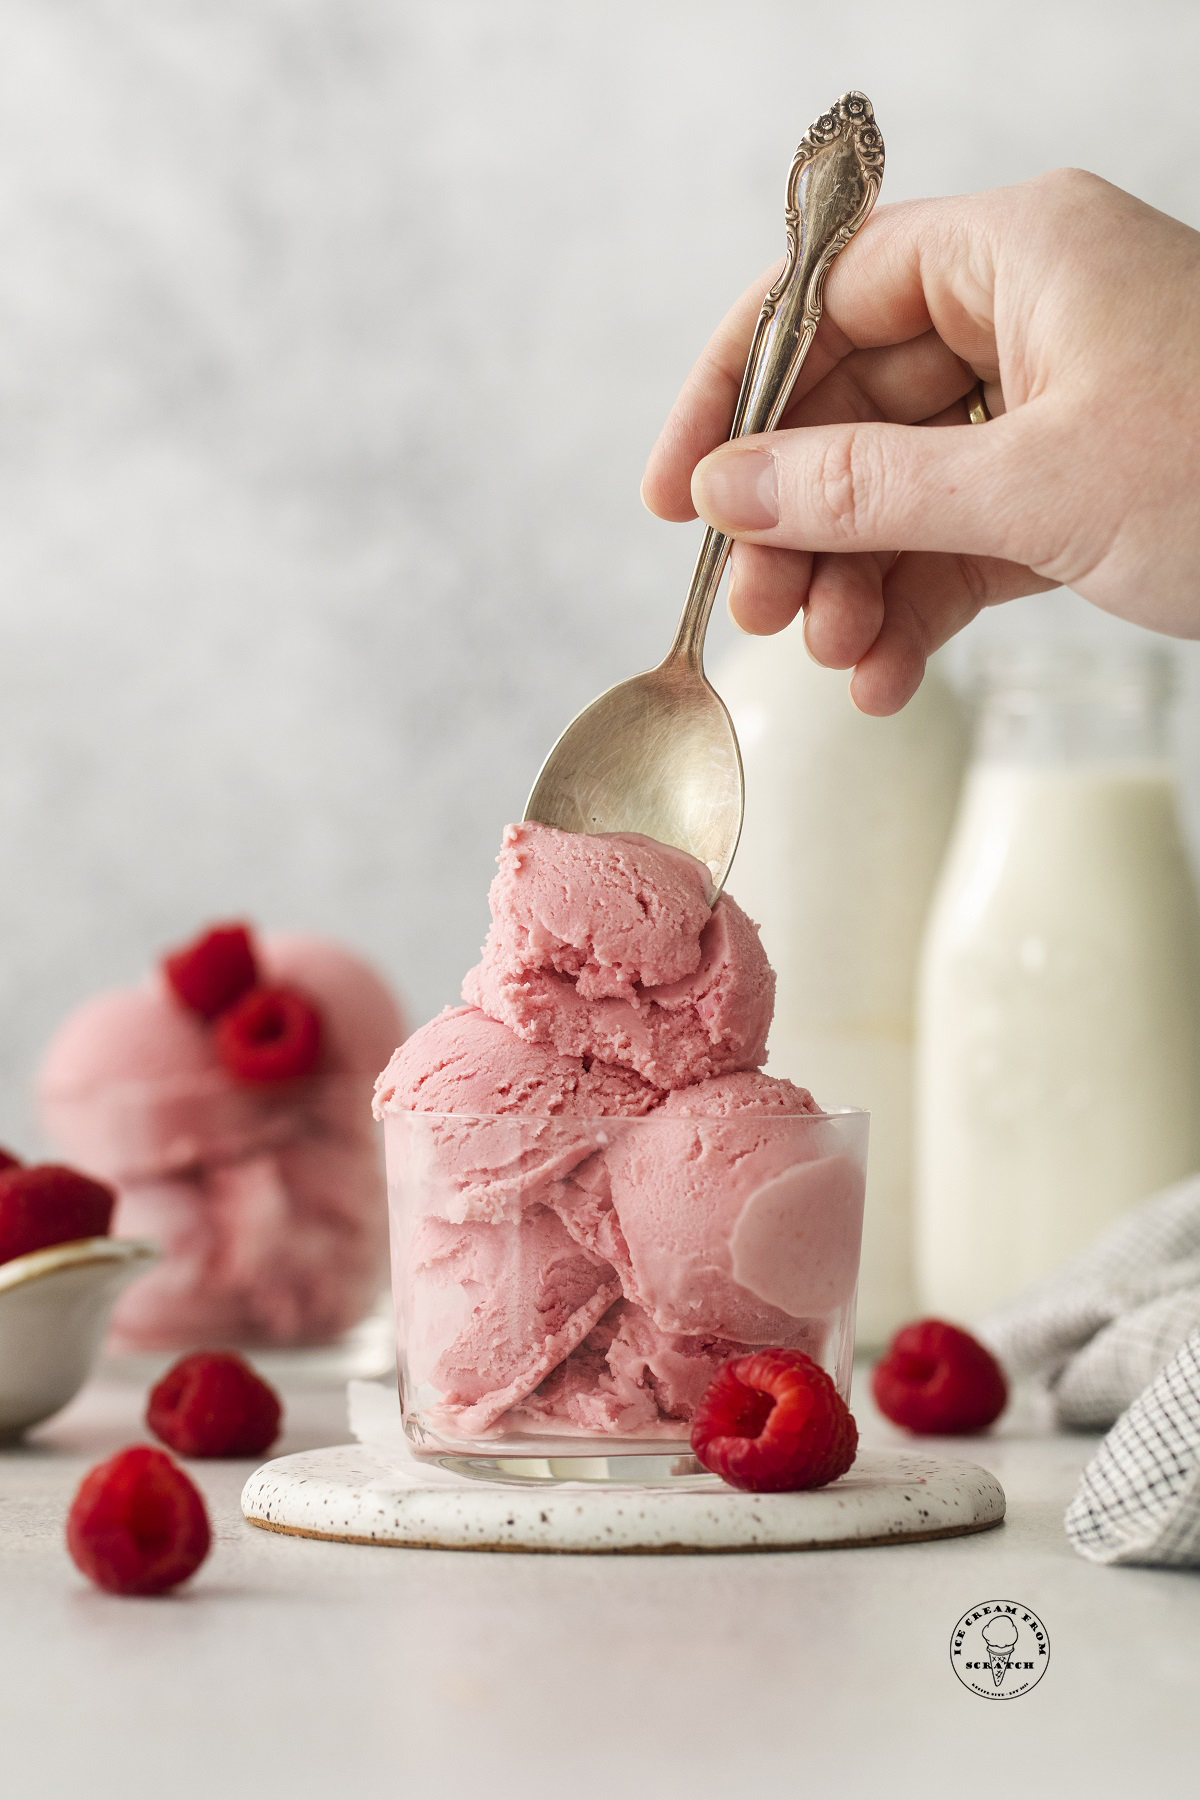 a hand holding a silver spoon being dipped into a glass bowl filled with scoops of pink sherbet.  The raspberries are next to the bowl and the cream bottles are at the bottom.